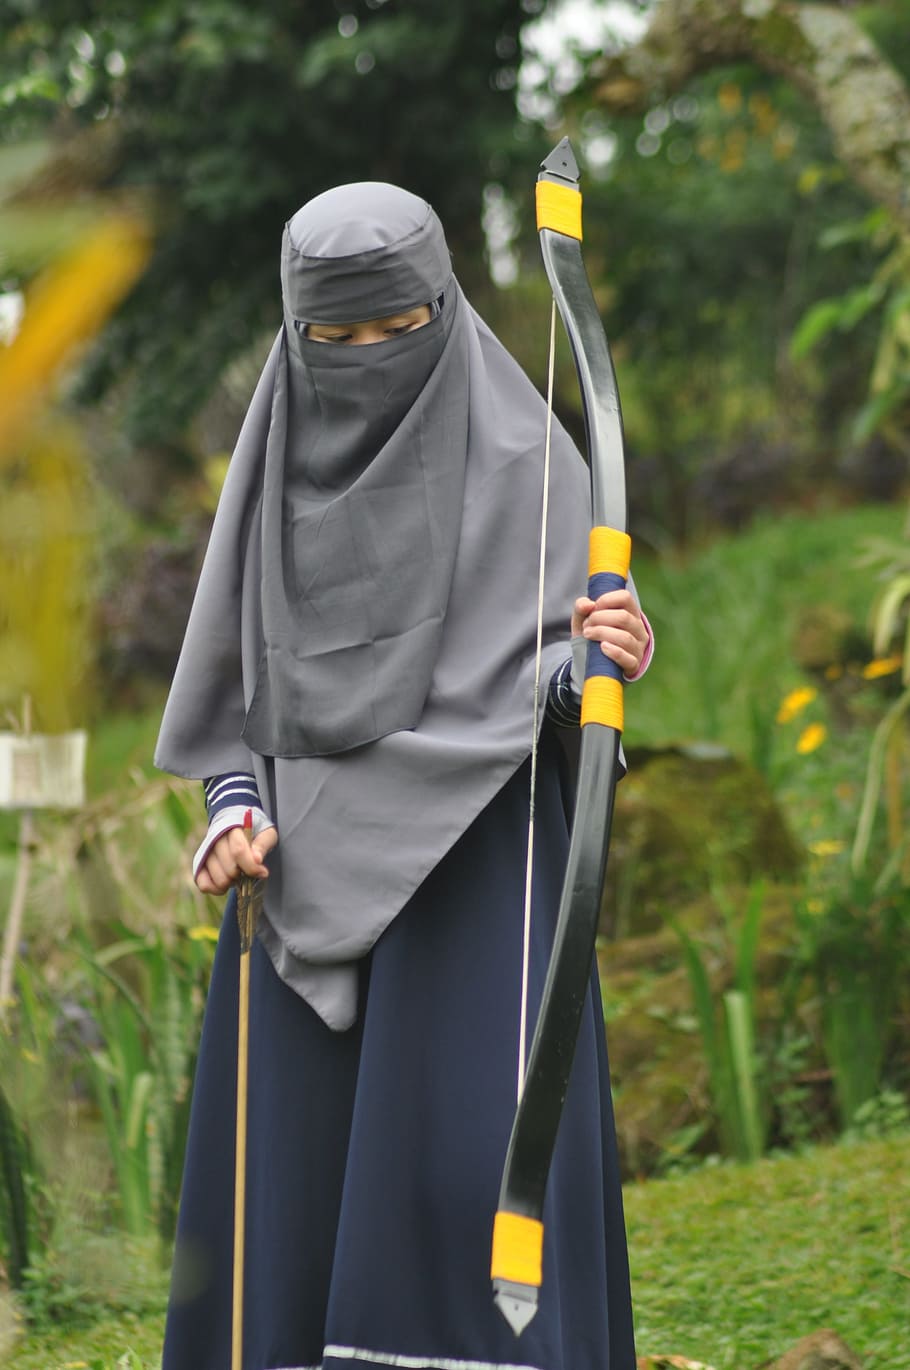 person, holding, black, yellow, compound bow, woman, hijab, women, model, islam